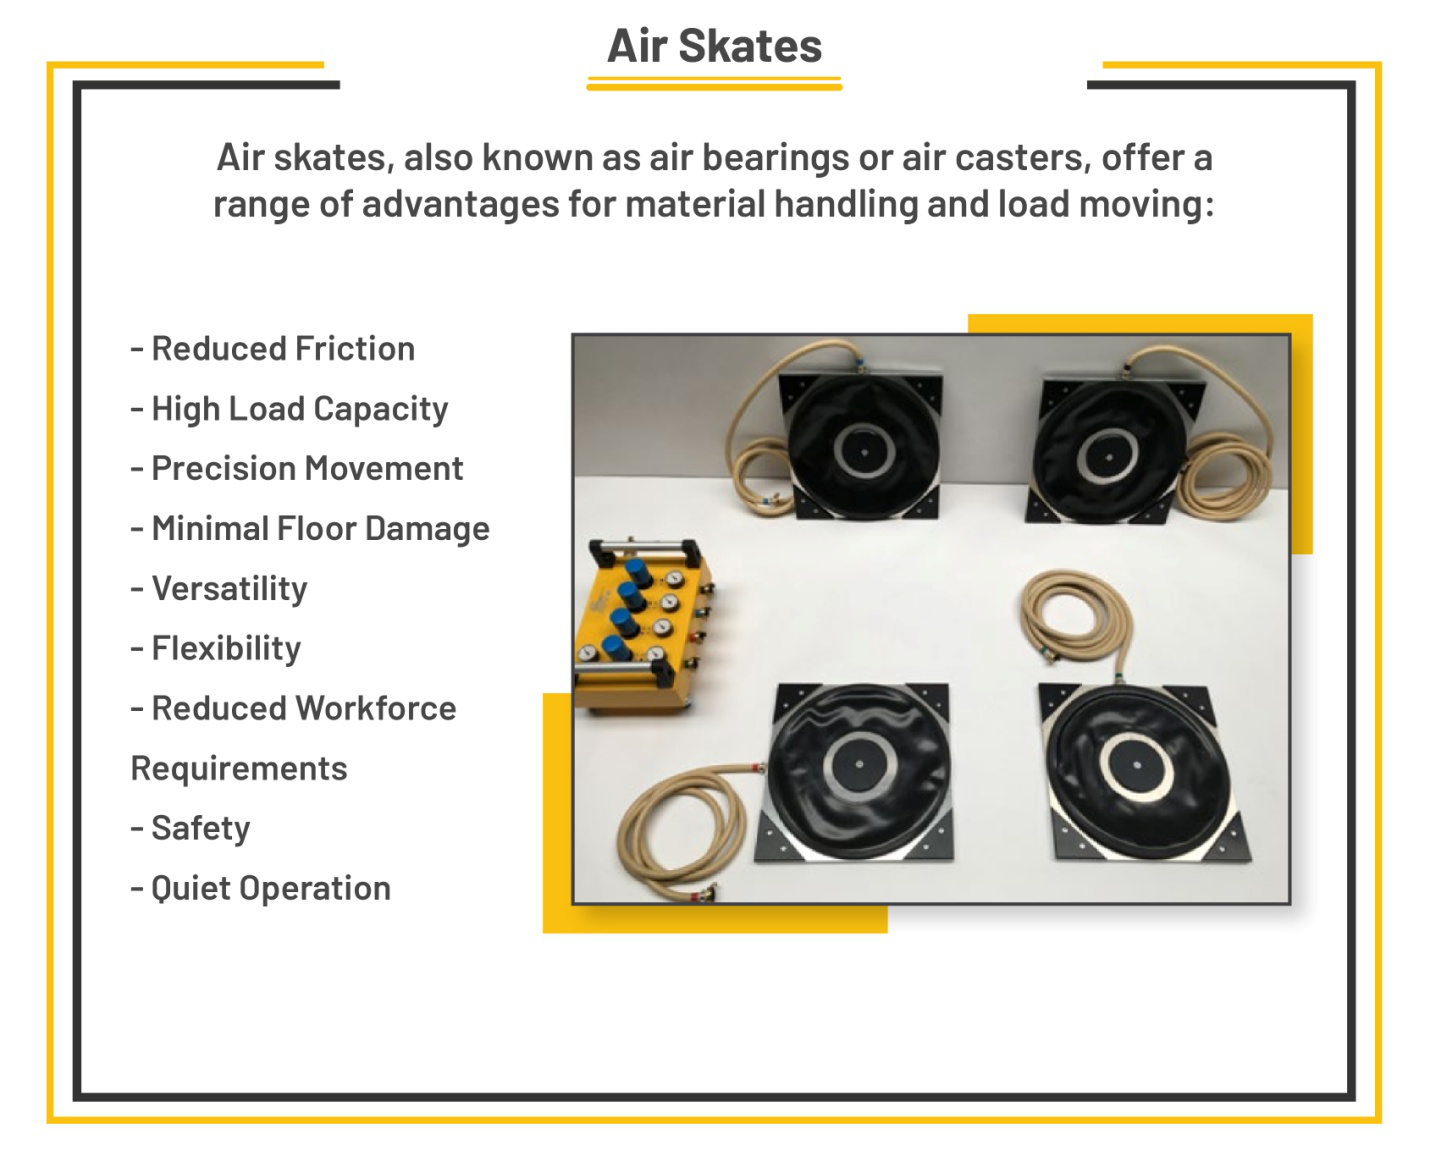 : An inforgraphic stating the benefits of air skates